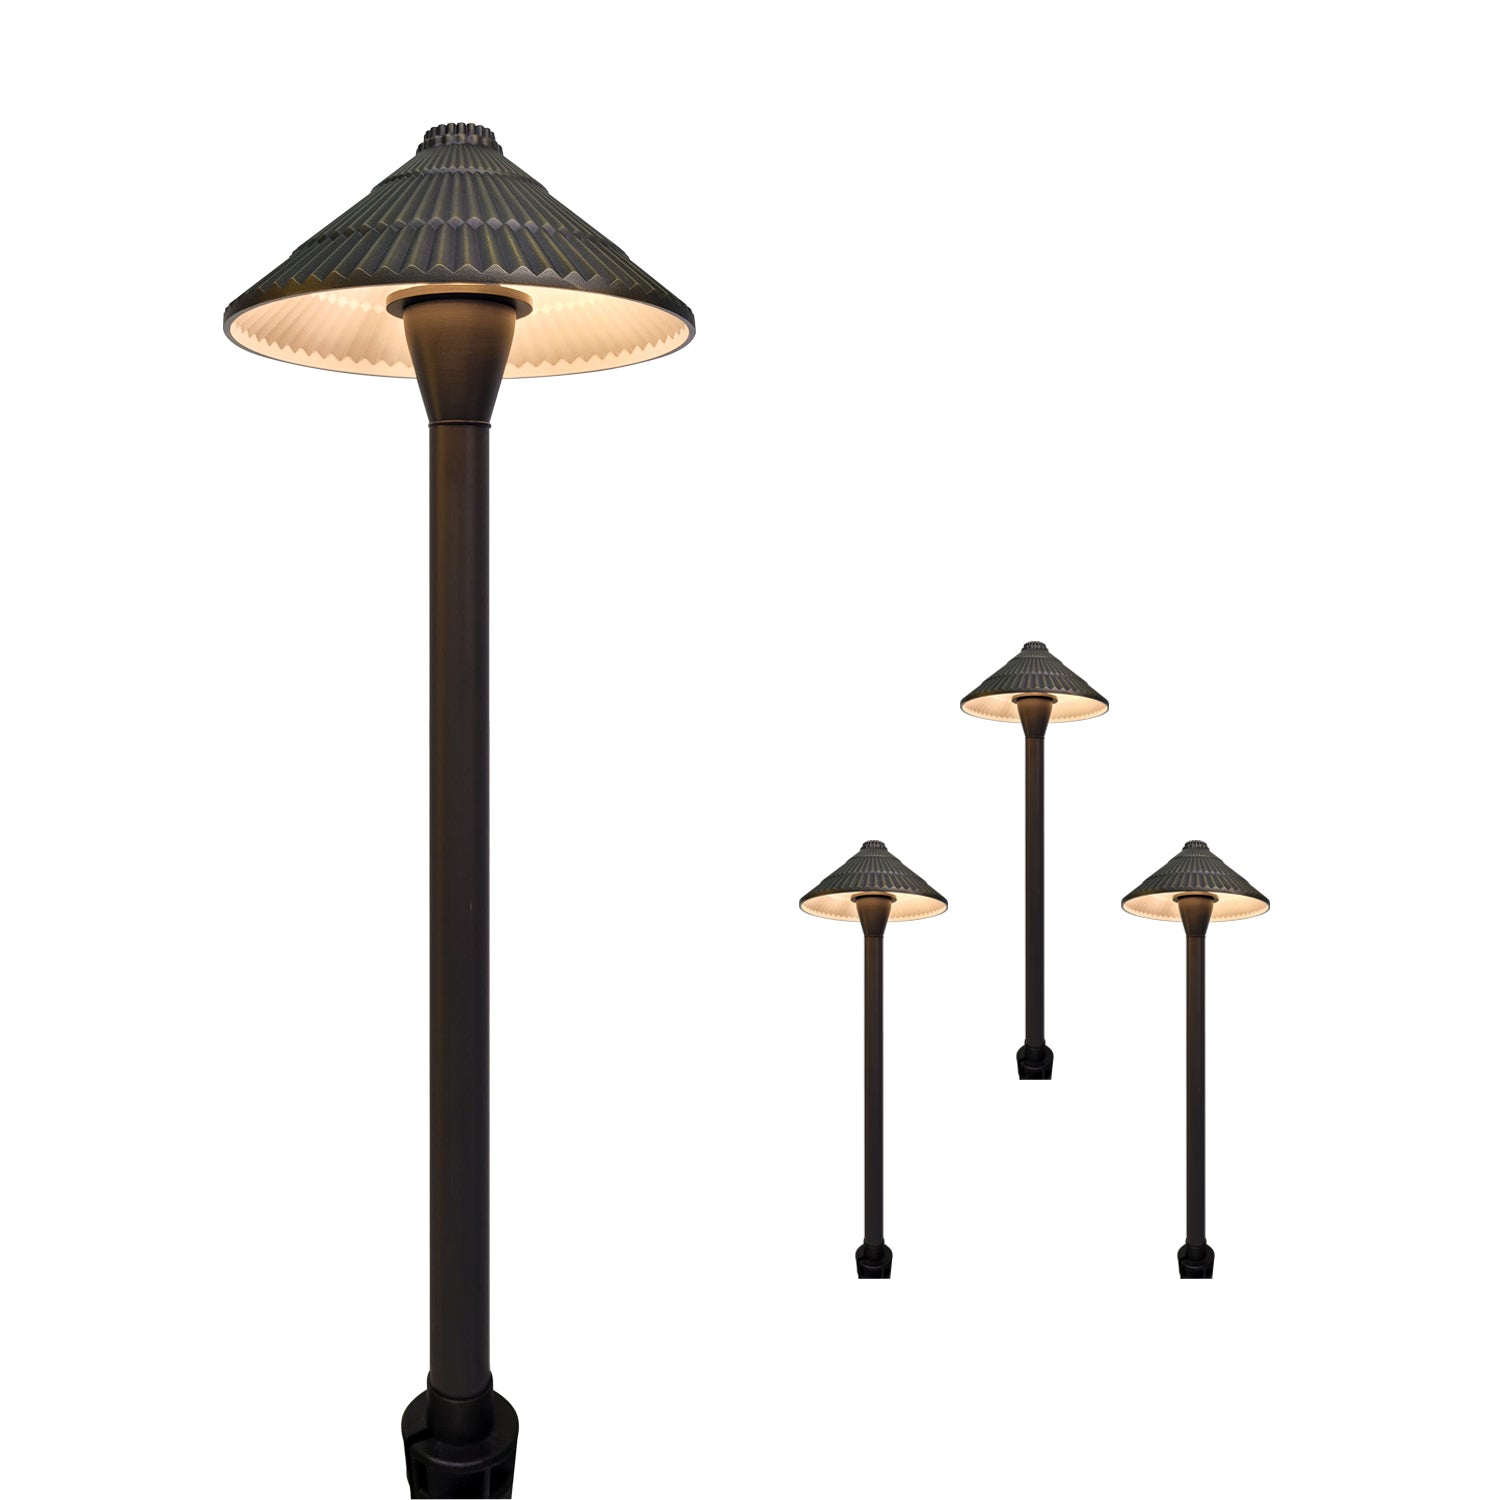 Brass low voltage LED garden pathway lights in various sizes for landscape and driveway lighting COP604B.